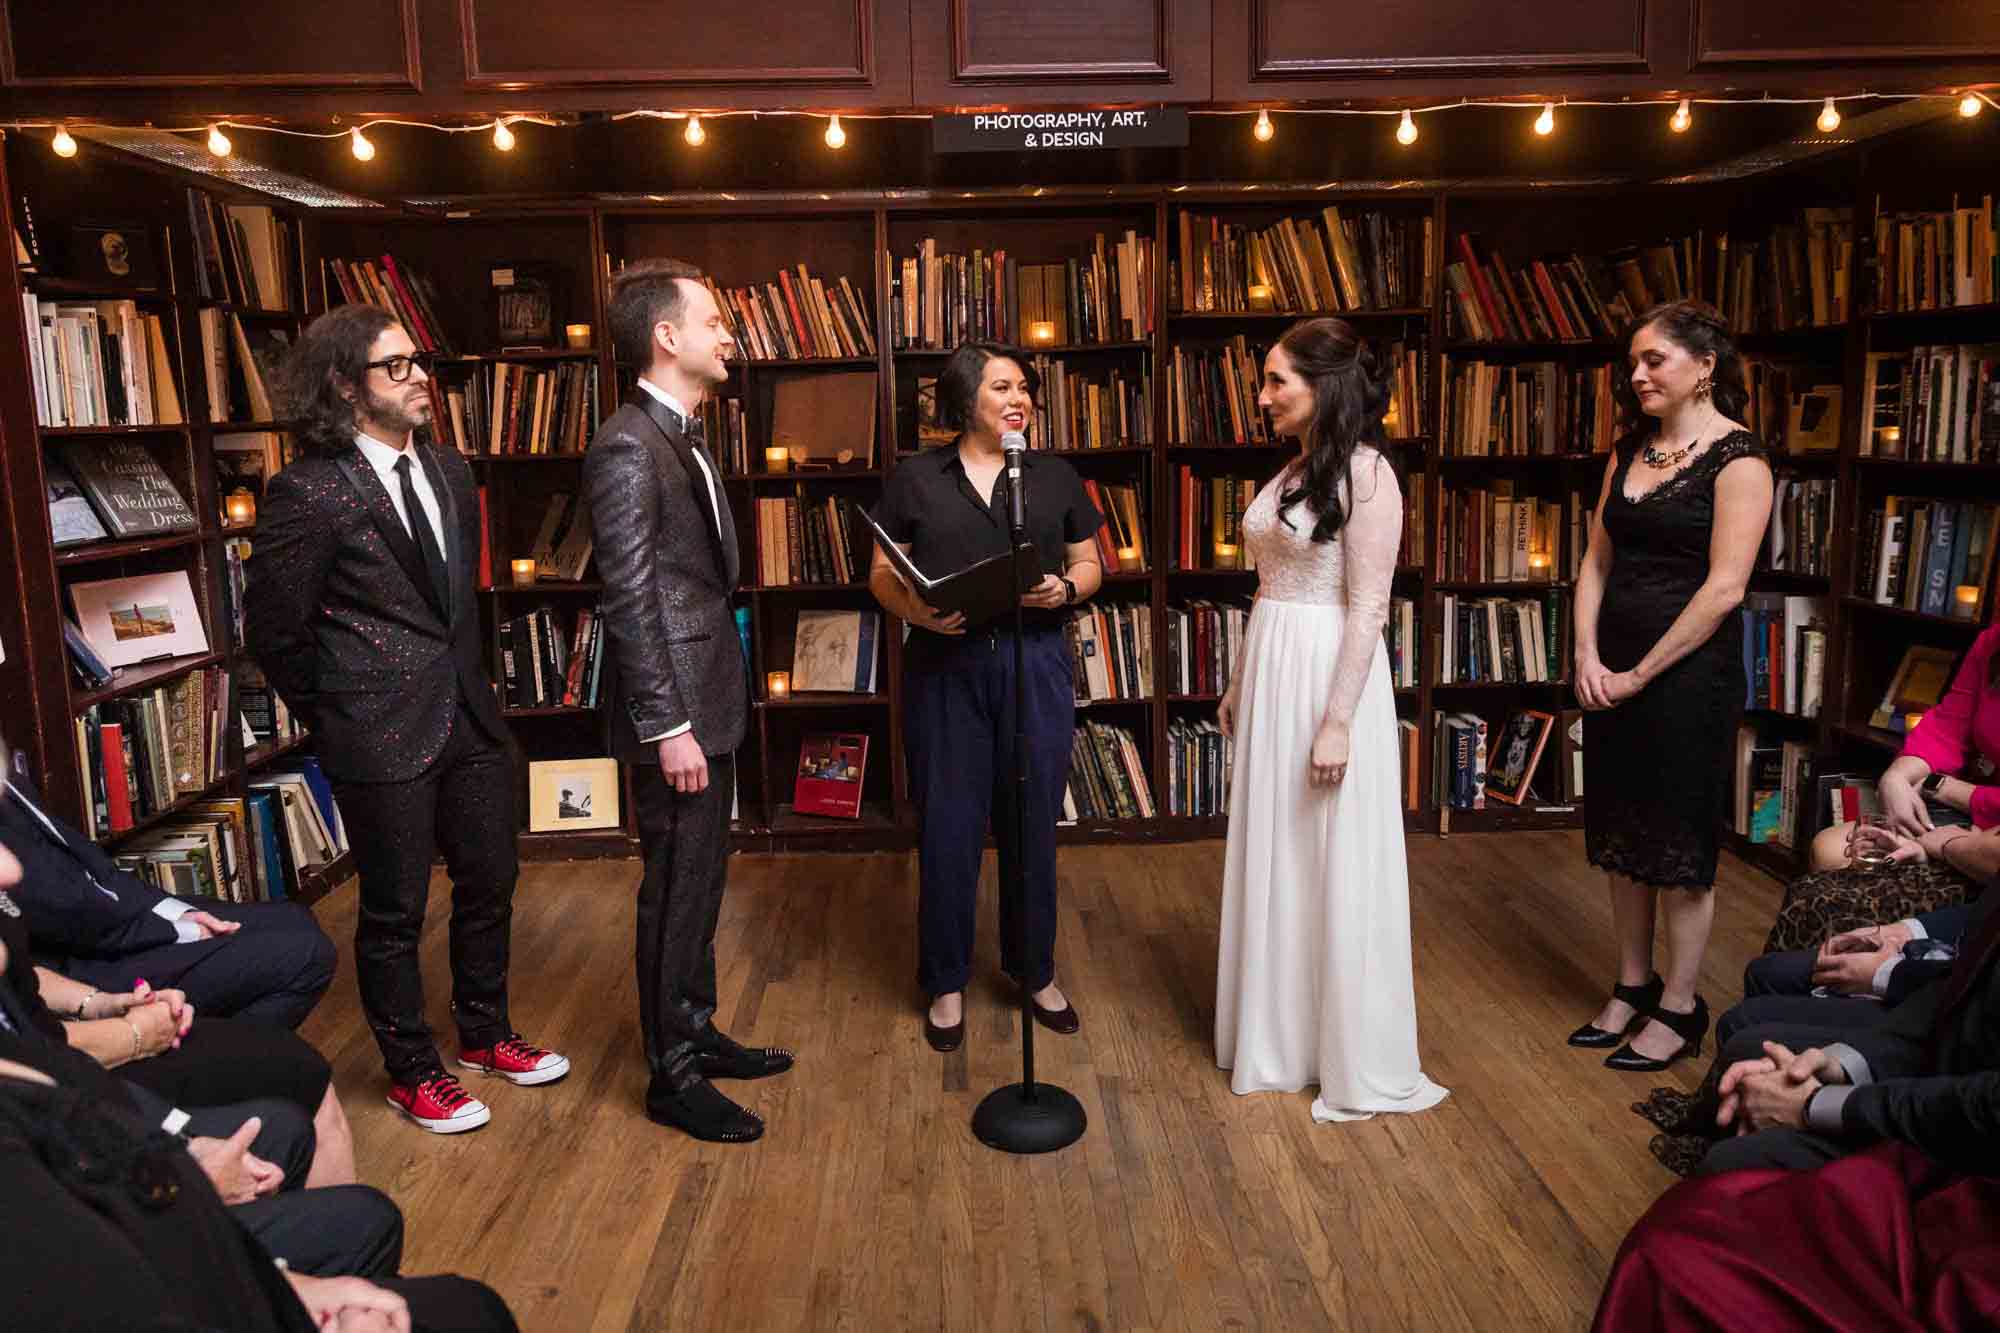 Wedding ceremony at a bookstore for an article on wedding ceremony photo tips